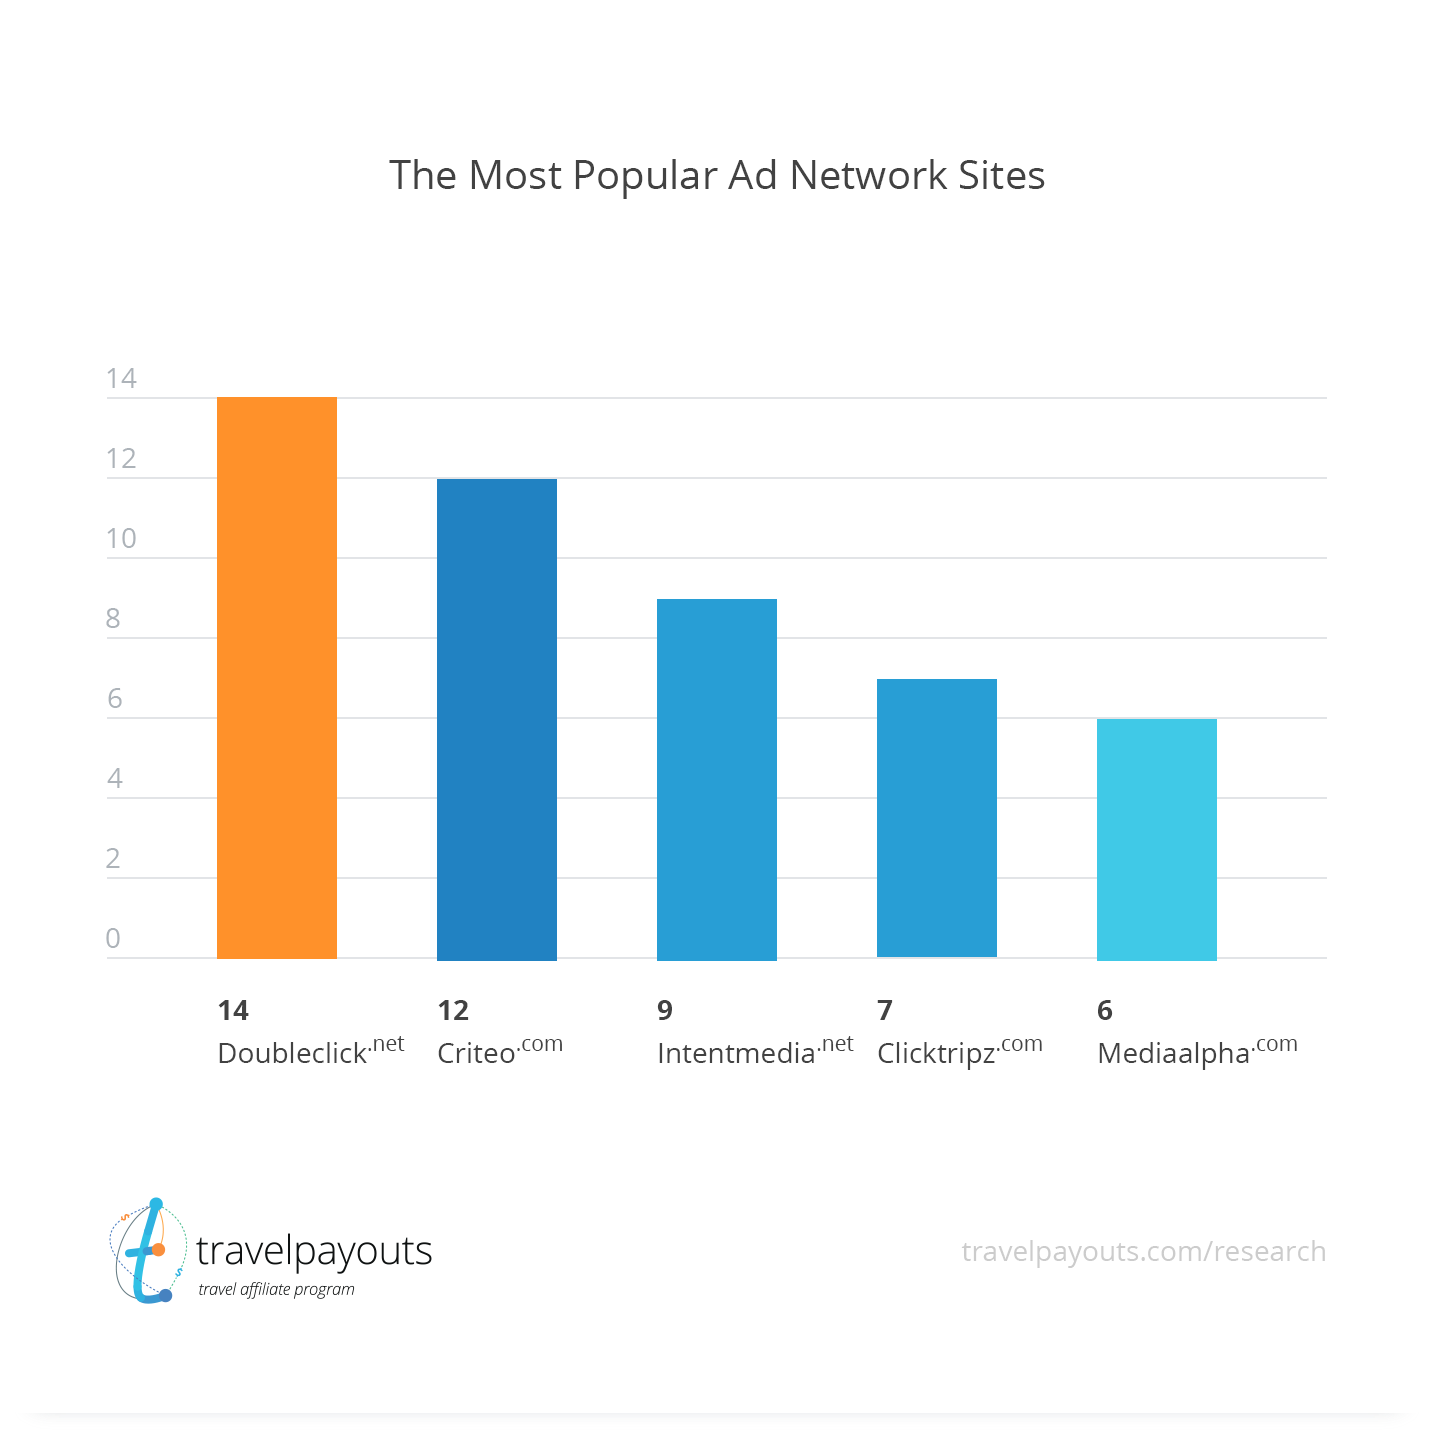 The most popular ad network sites